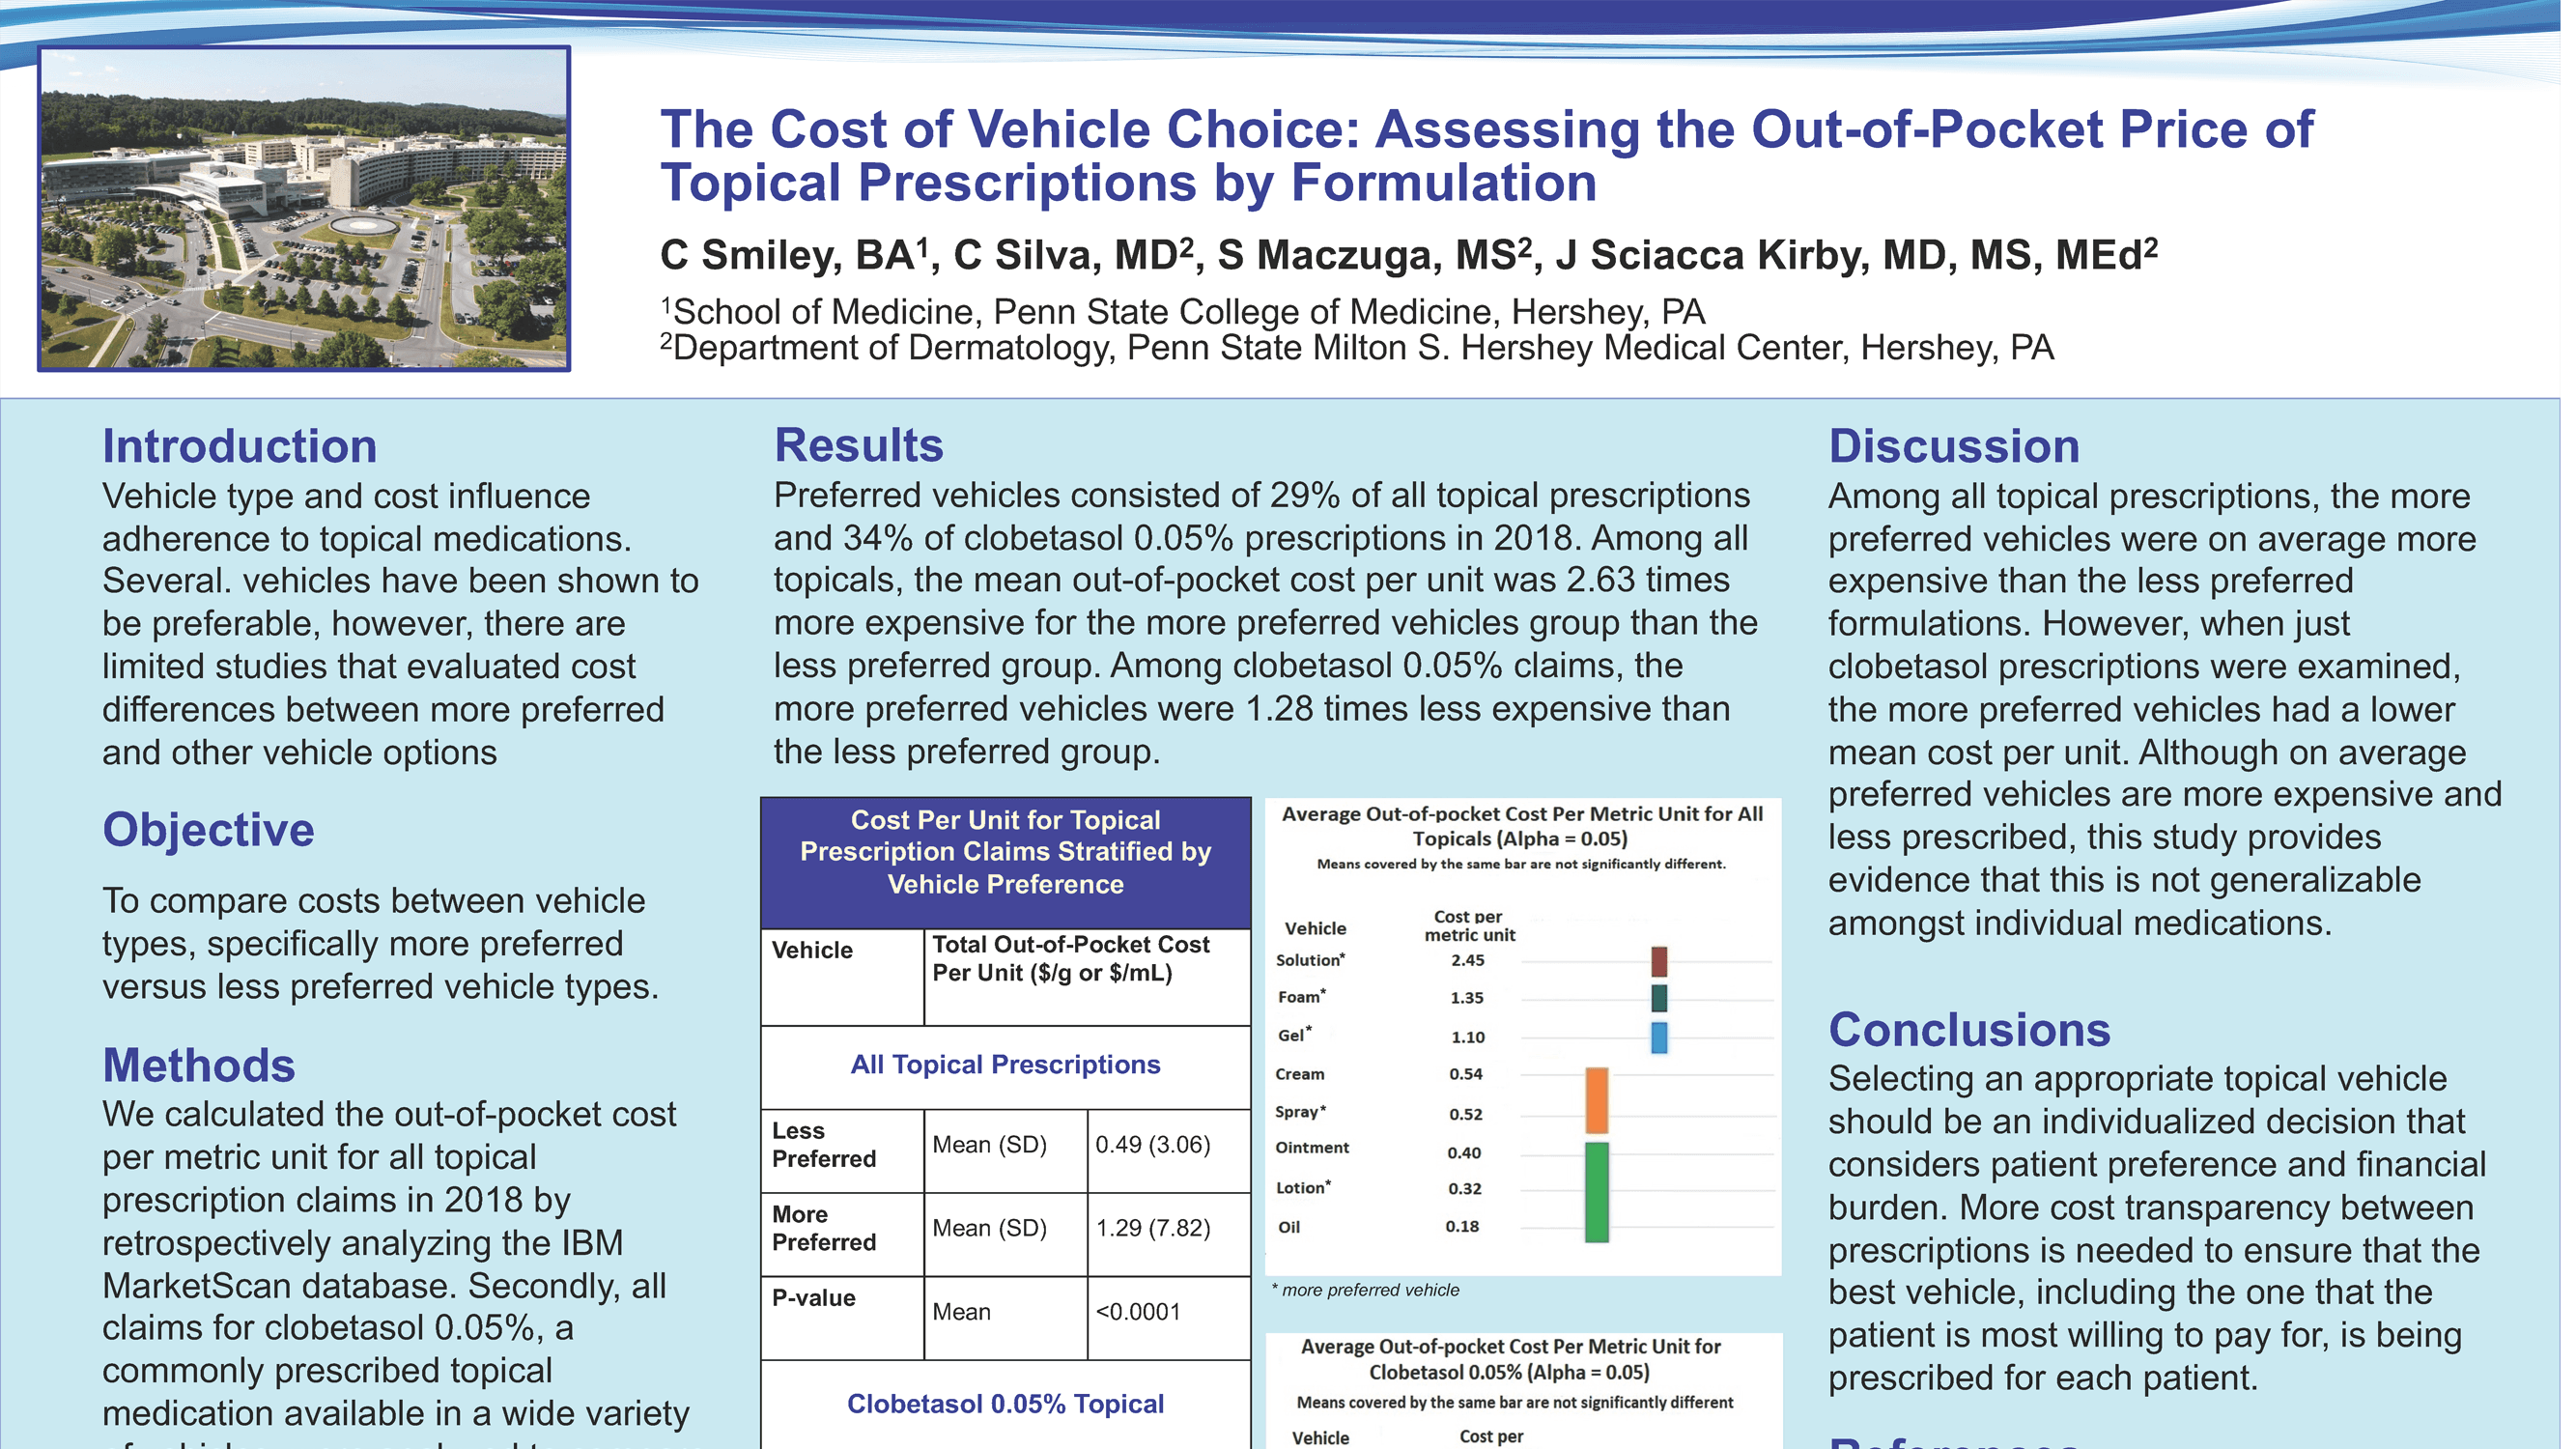 Catherine Smiley - PAE-51-The Cost of Vehicle Choice- Assessing the Average Out-of-Pocket Price of Topical Prescriptions by Formulation